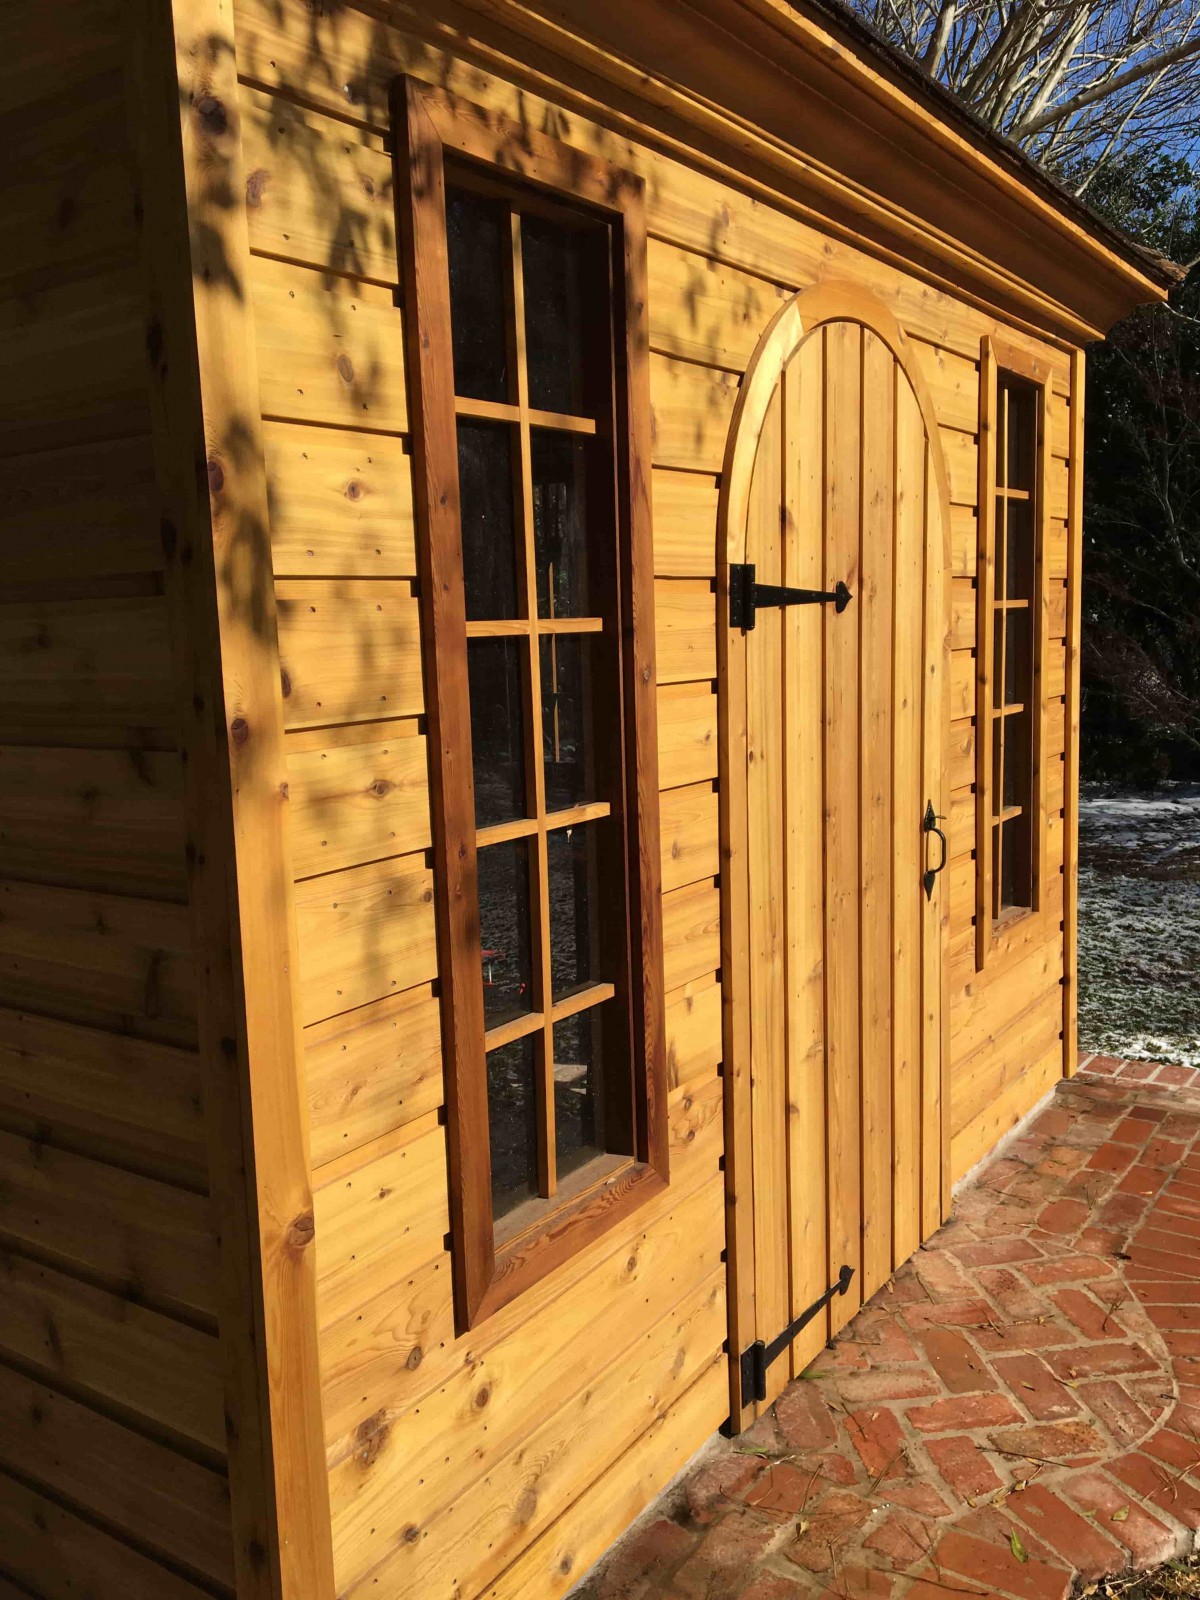 Backyard Melbourne shed plan 10' x 10' featured with rough cedar arched door and casement window as seen from the side. Id number 5744.